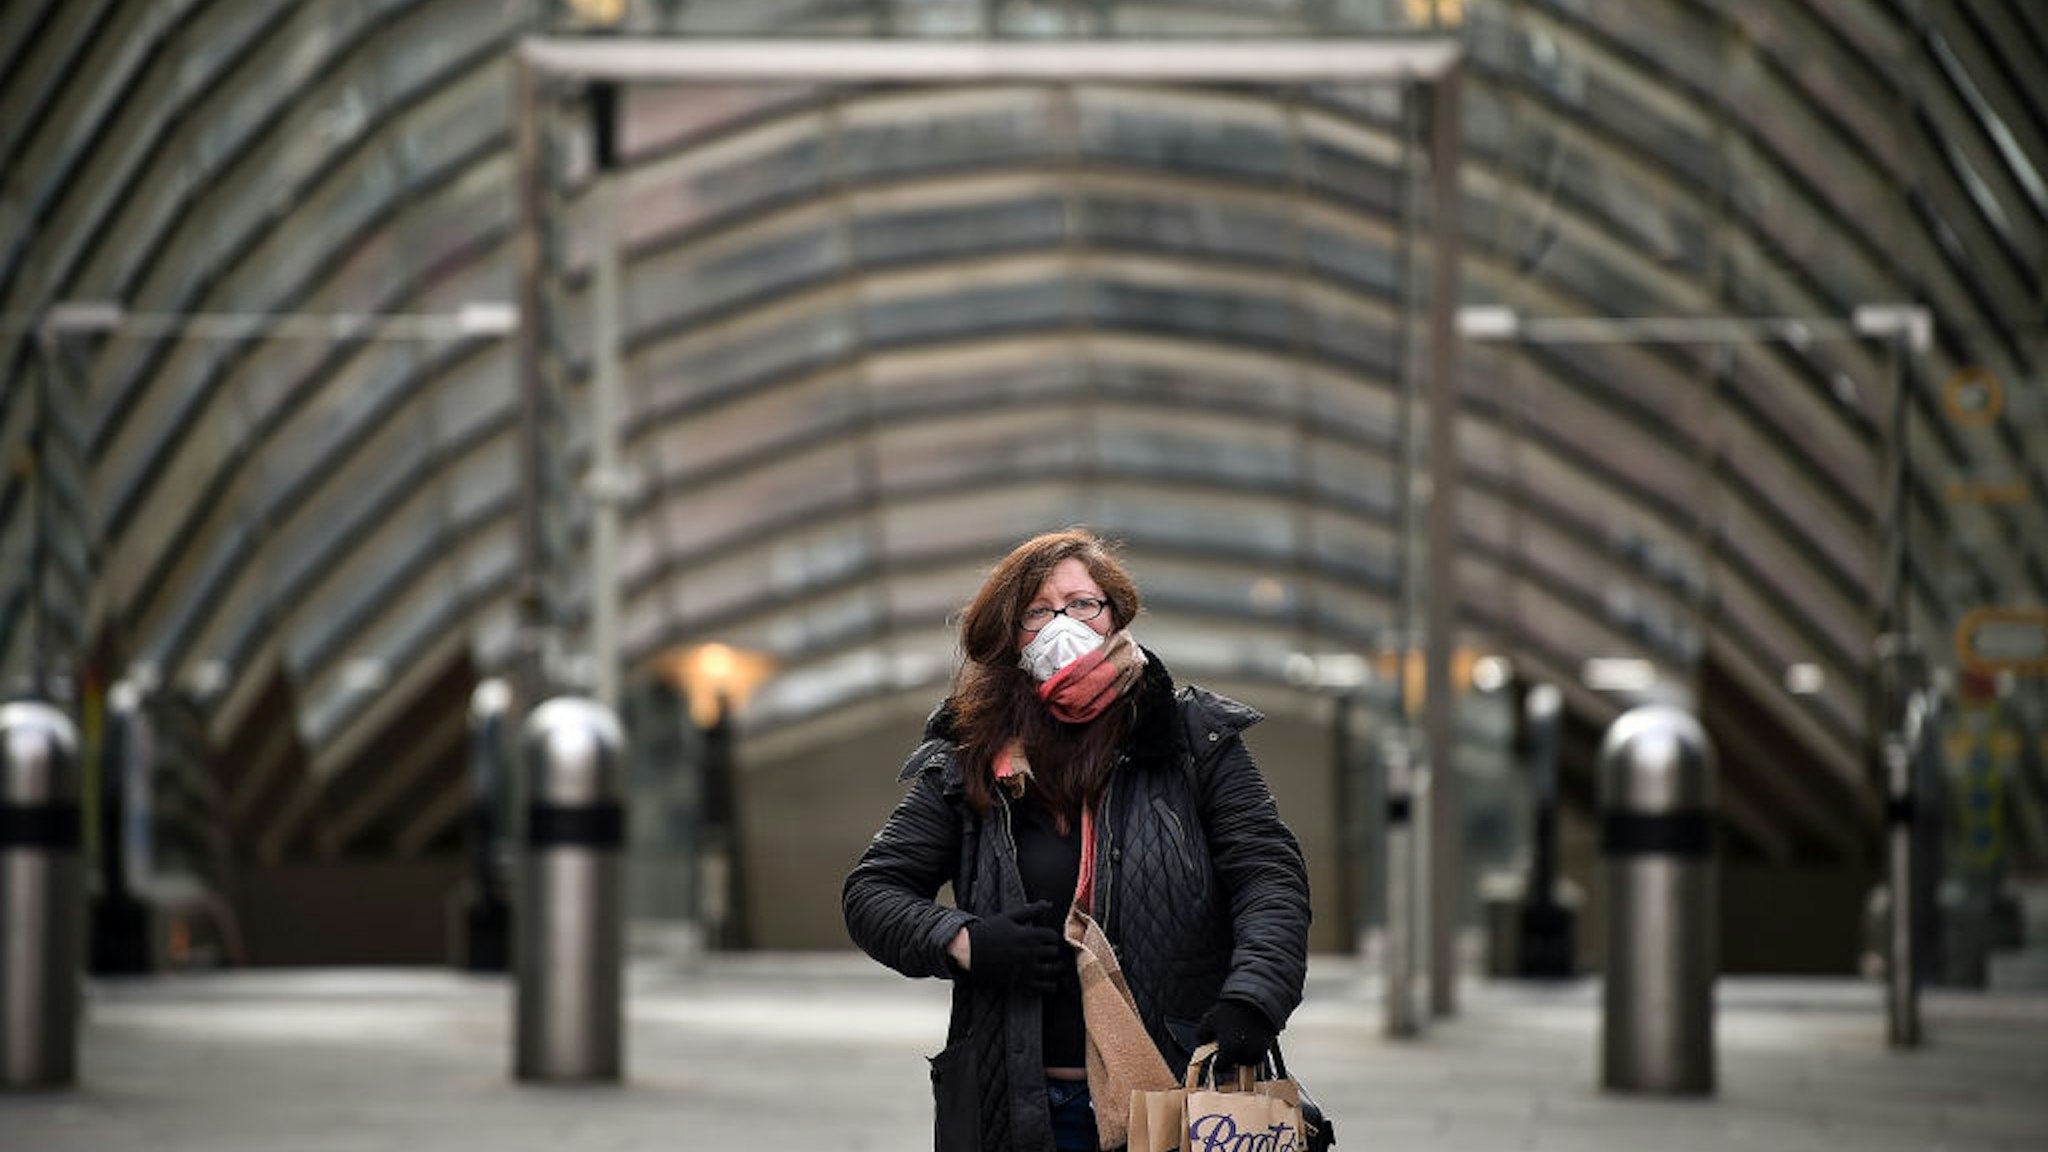 A woman wears a mask outside St Enoch subway station on March 21, 2020 in Glasgow, Scotland. Coronavirus (COVID-19) has spread to at least 182 countries, claiming over 10,000 lives and infecting more than 250,000 people.